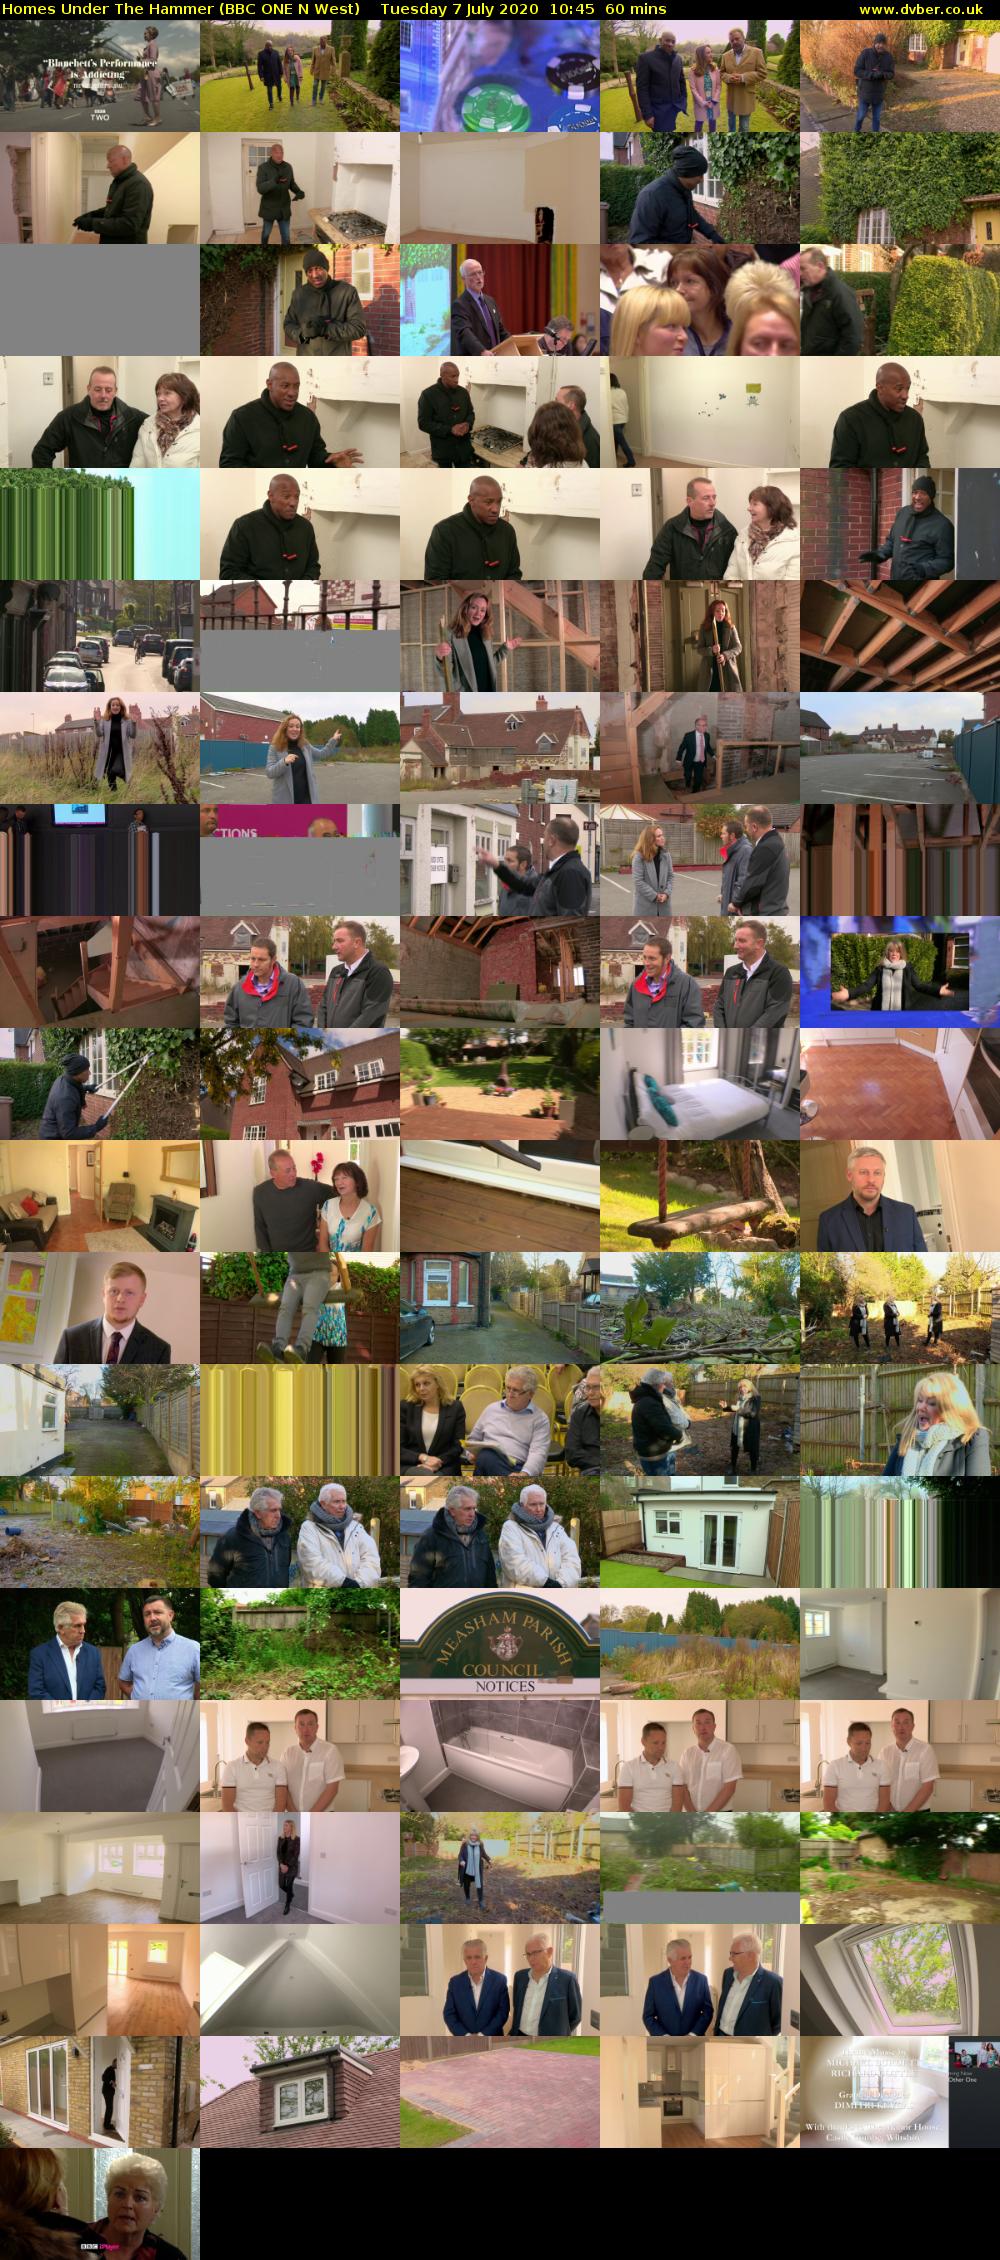 Homes Under The Hammer (BBC ONE N West) Tuesday 7 July 2020 10:45 - 11:45